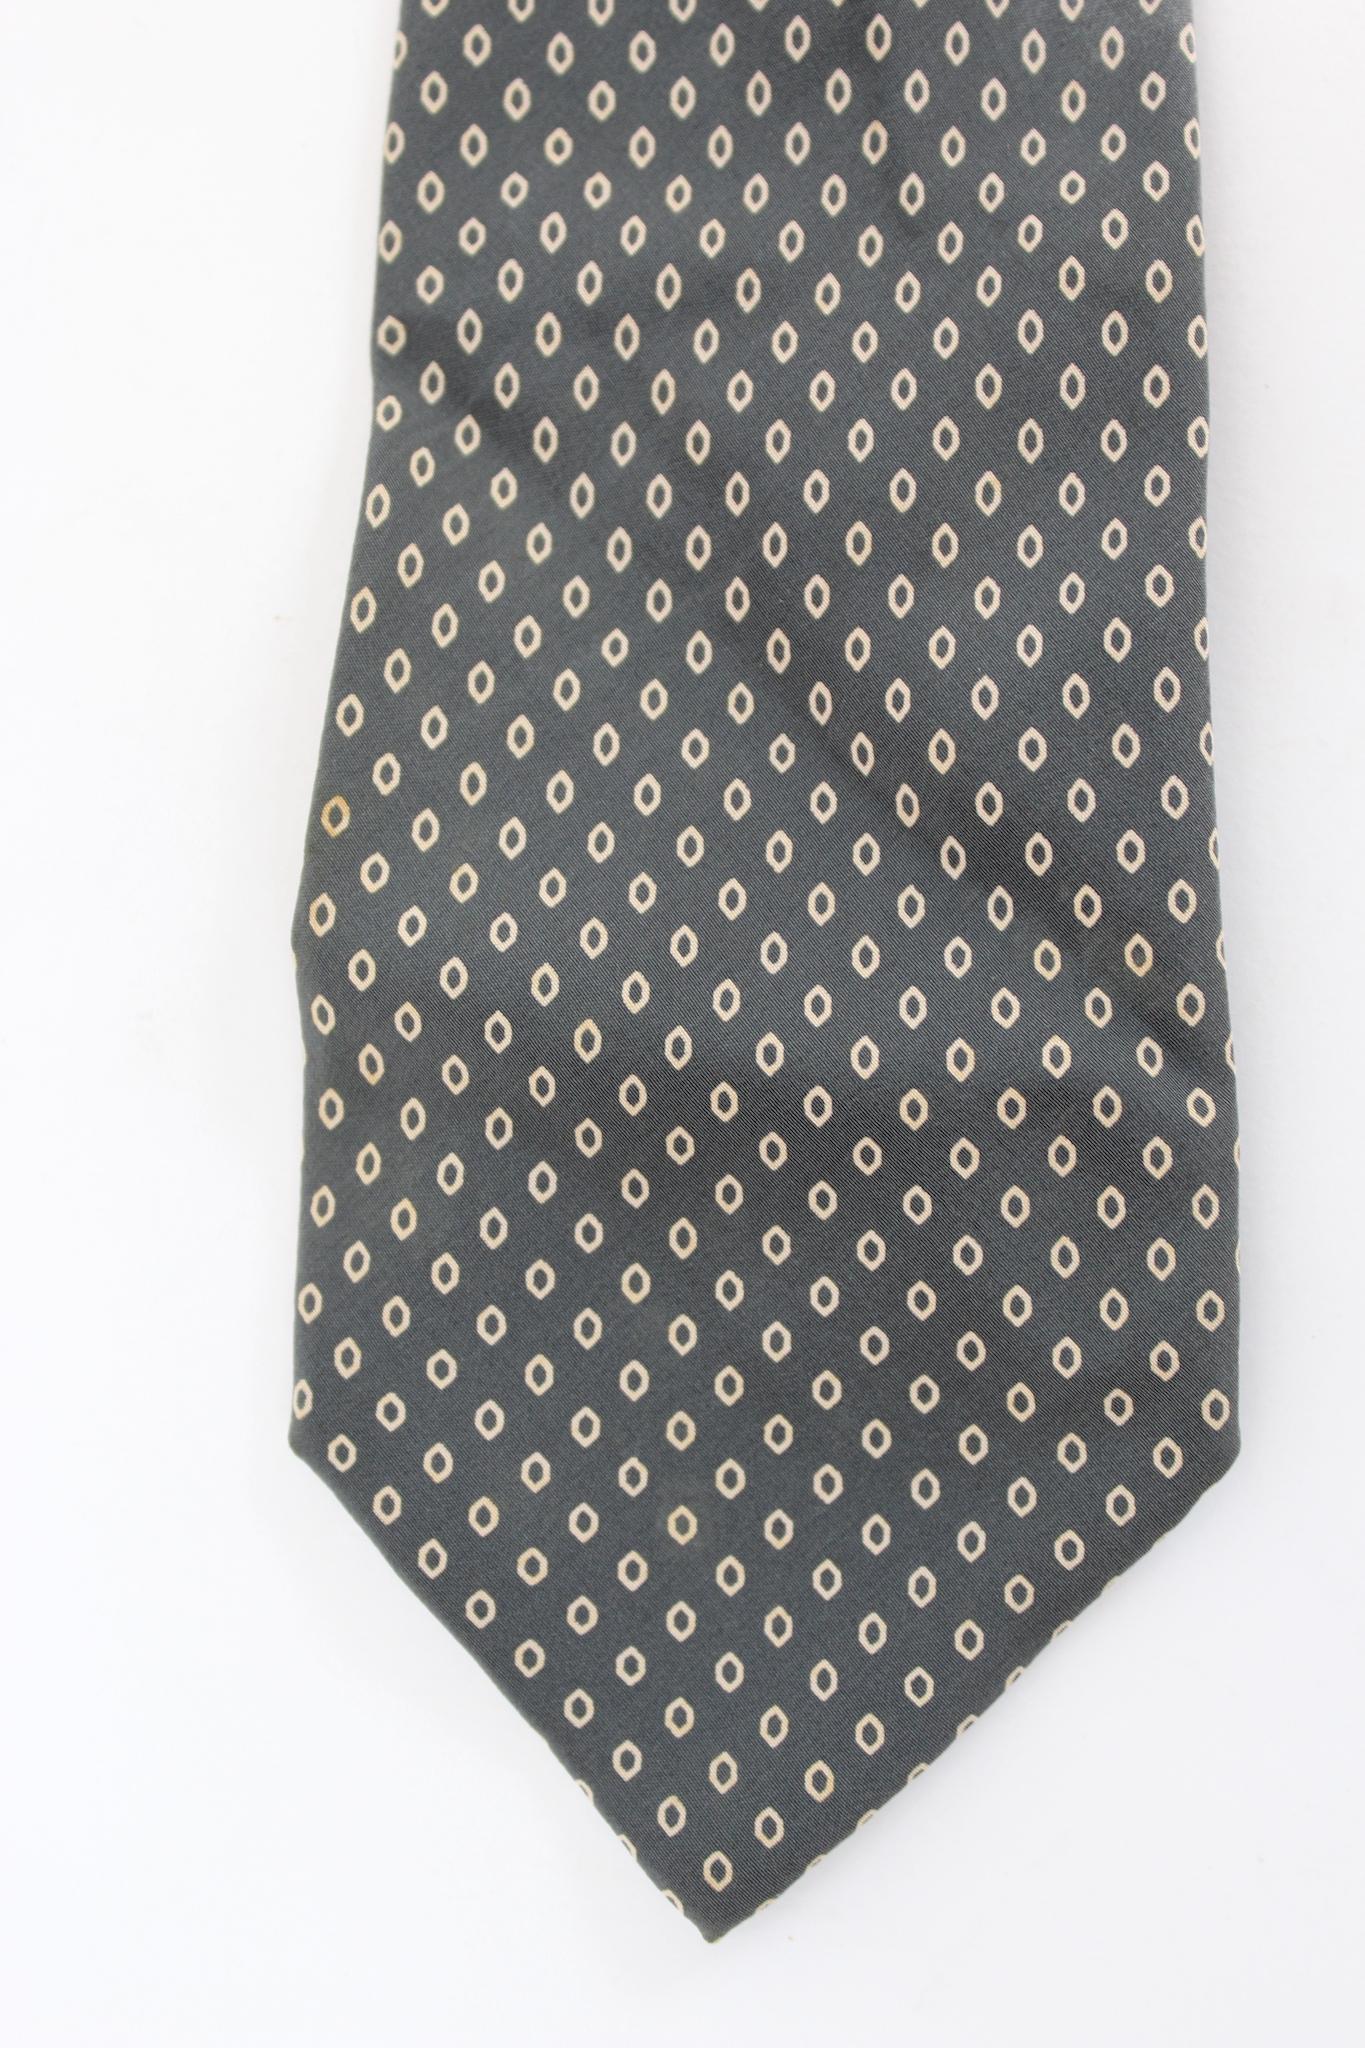 Yves Saint Laurent classic geometric vintage 90s tie. Gray and beige color, 100% silk. Made in Italy.

Length: 147 cm
Width: 8 cm